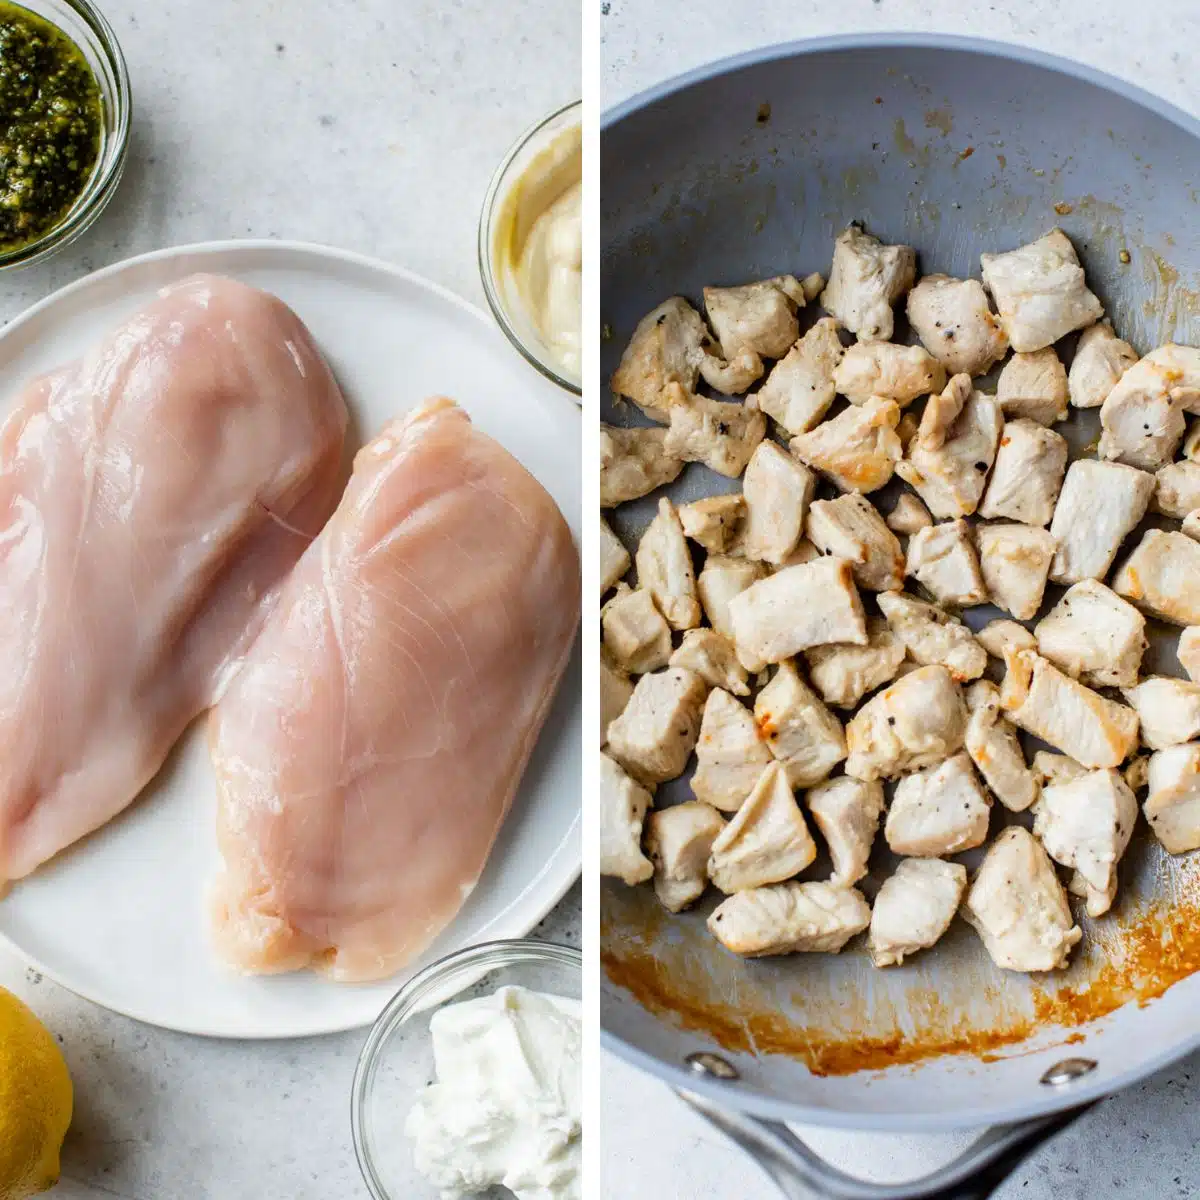 2 images: the left image shows the raw chicken breasts on a plate and the right image shows the chicken pieces grilling in a skillet